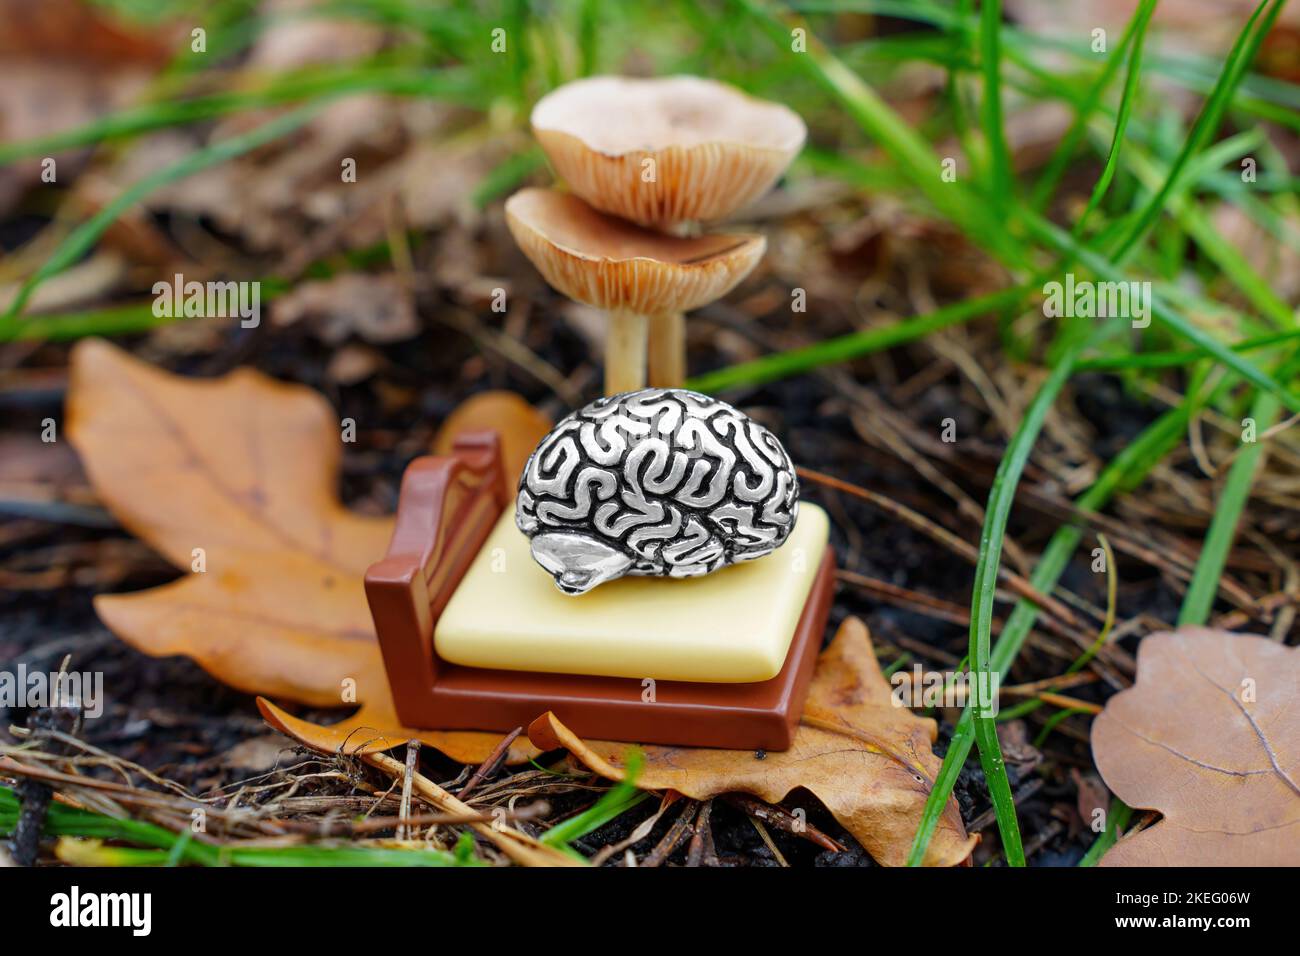 Miniature human brain figurine sleeping in a toy bed under fresh mushroom in the woods, selective focus. Creative mind dreaming concept. Stock Photo